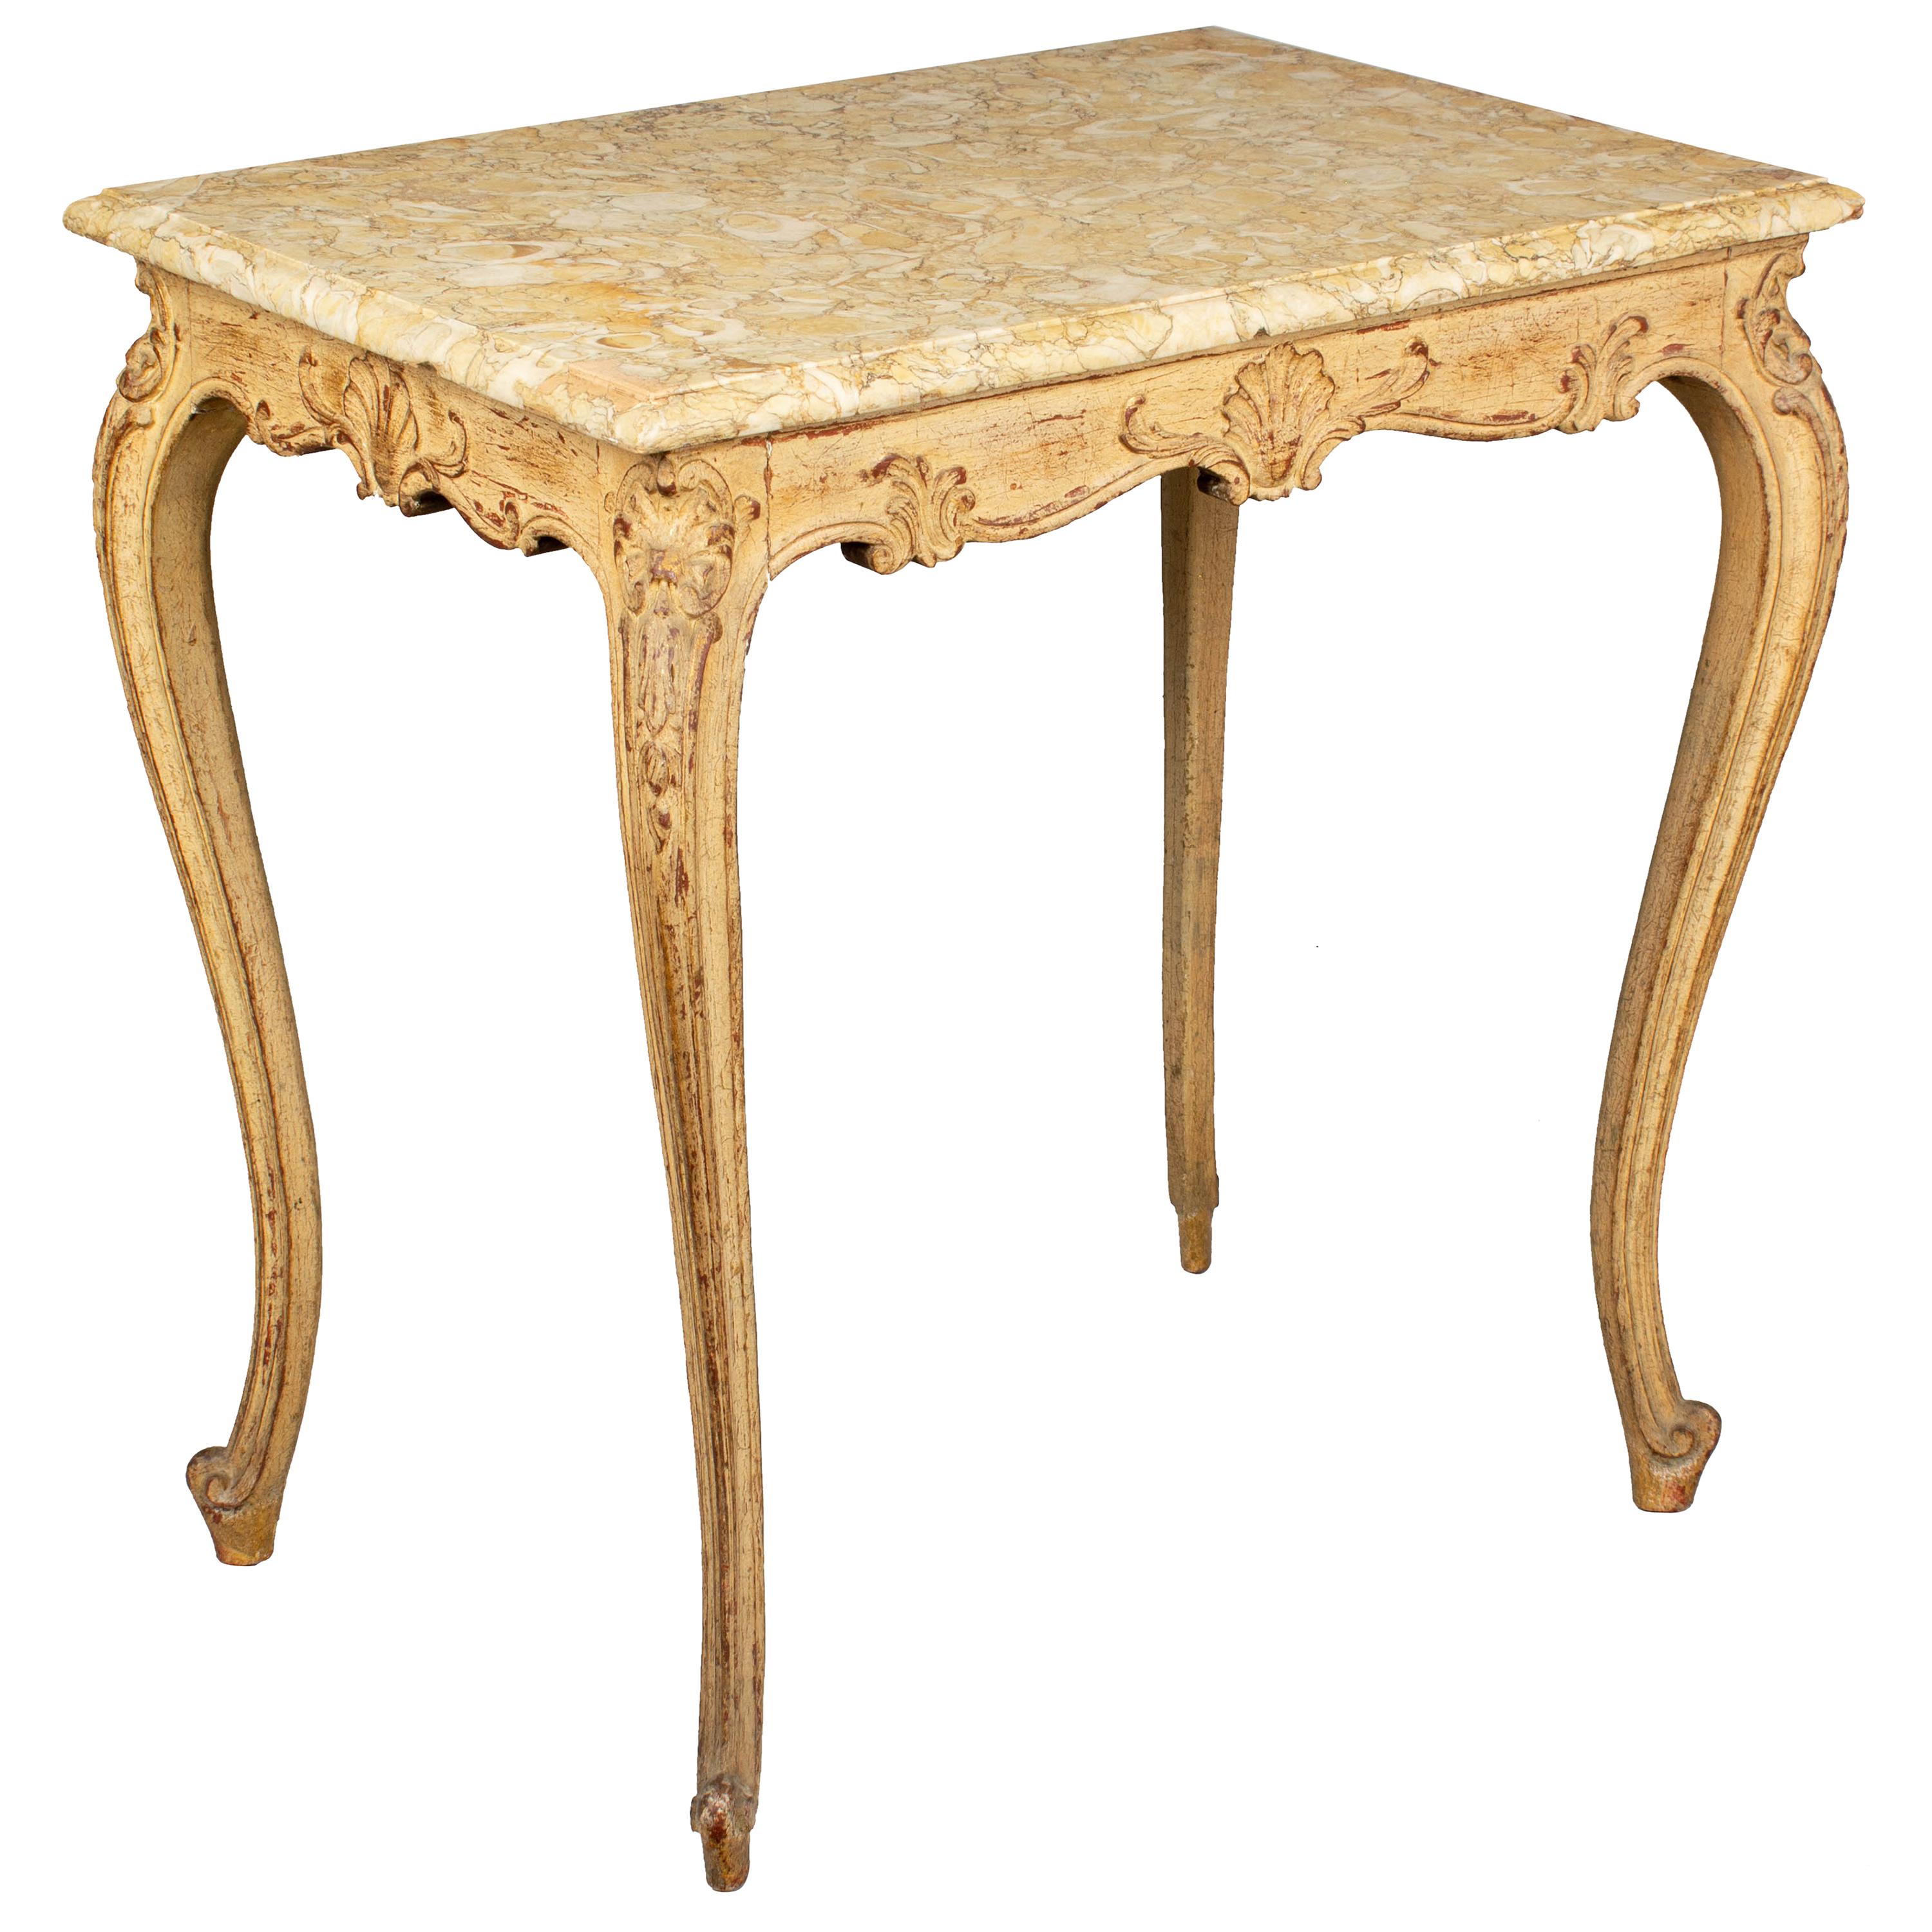 Early 20th c French Louis XV Style Marble-Top Table For Sale